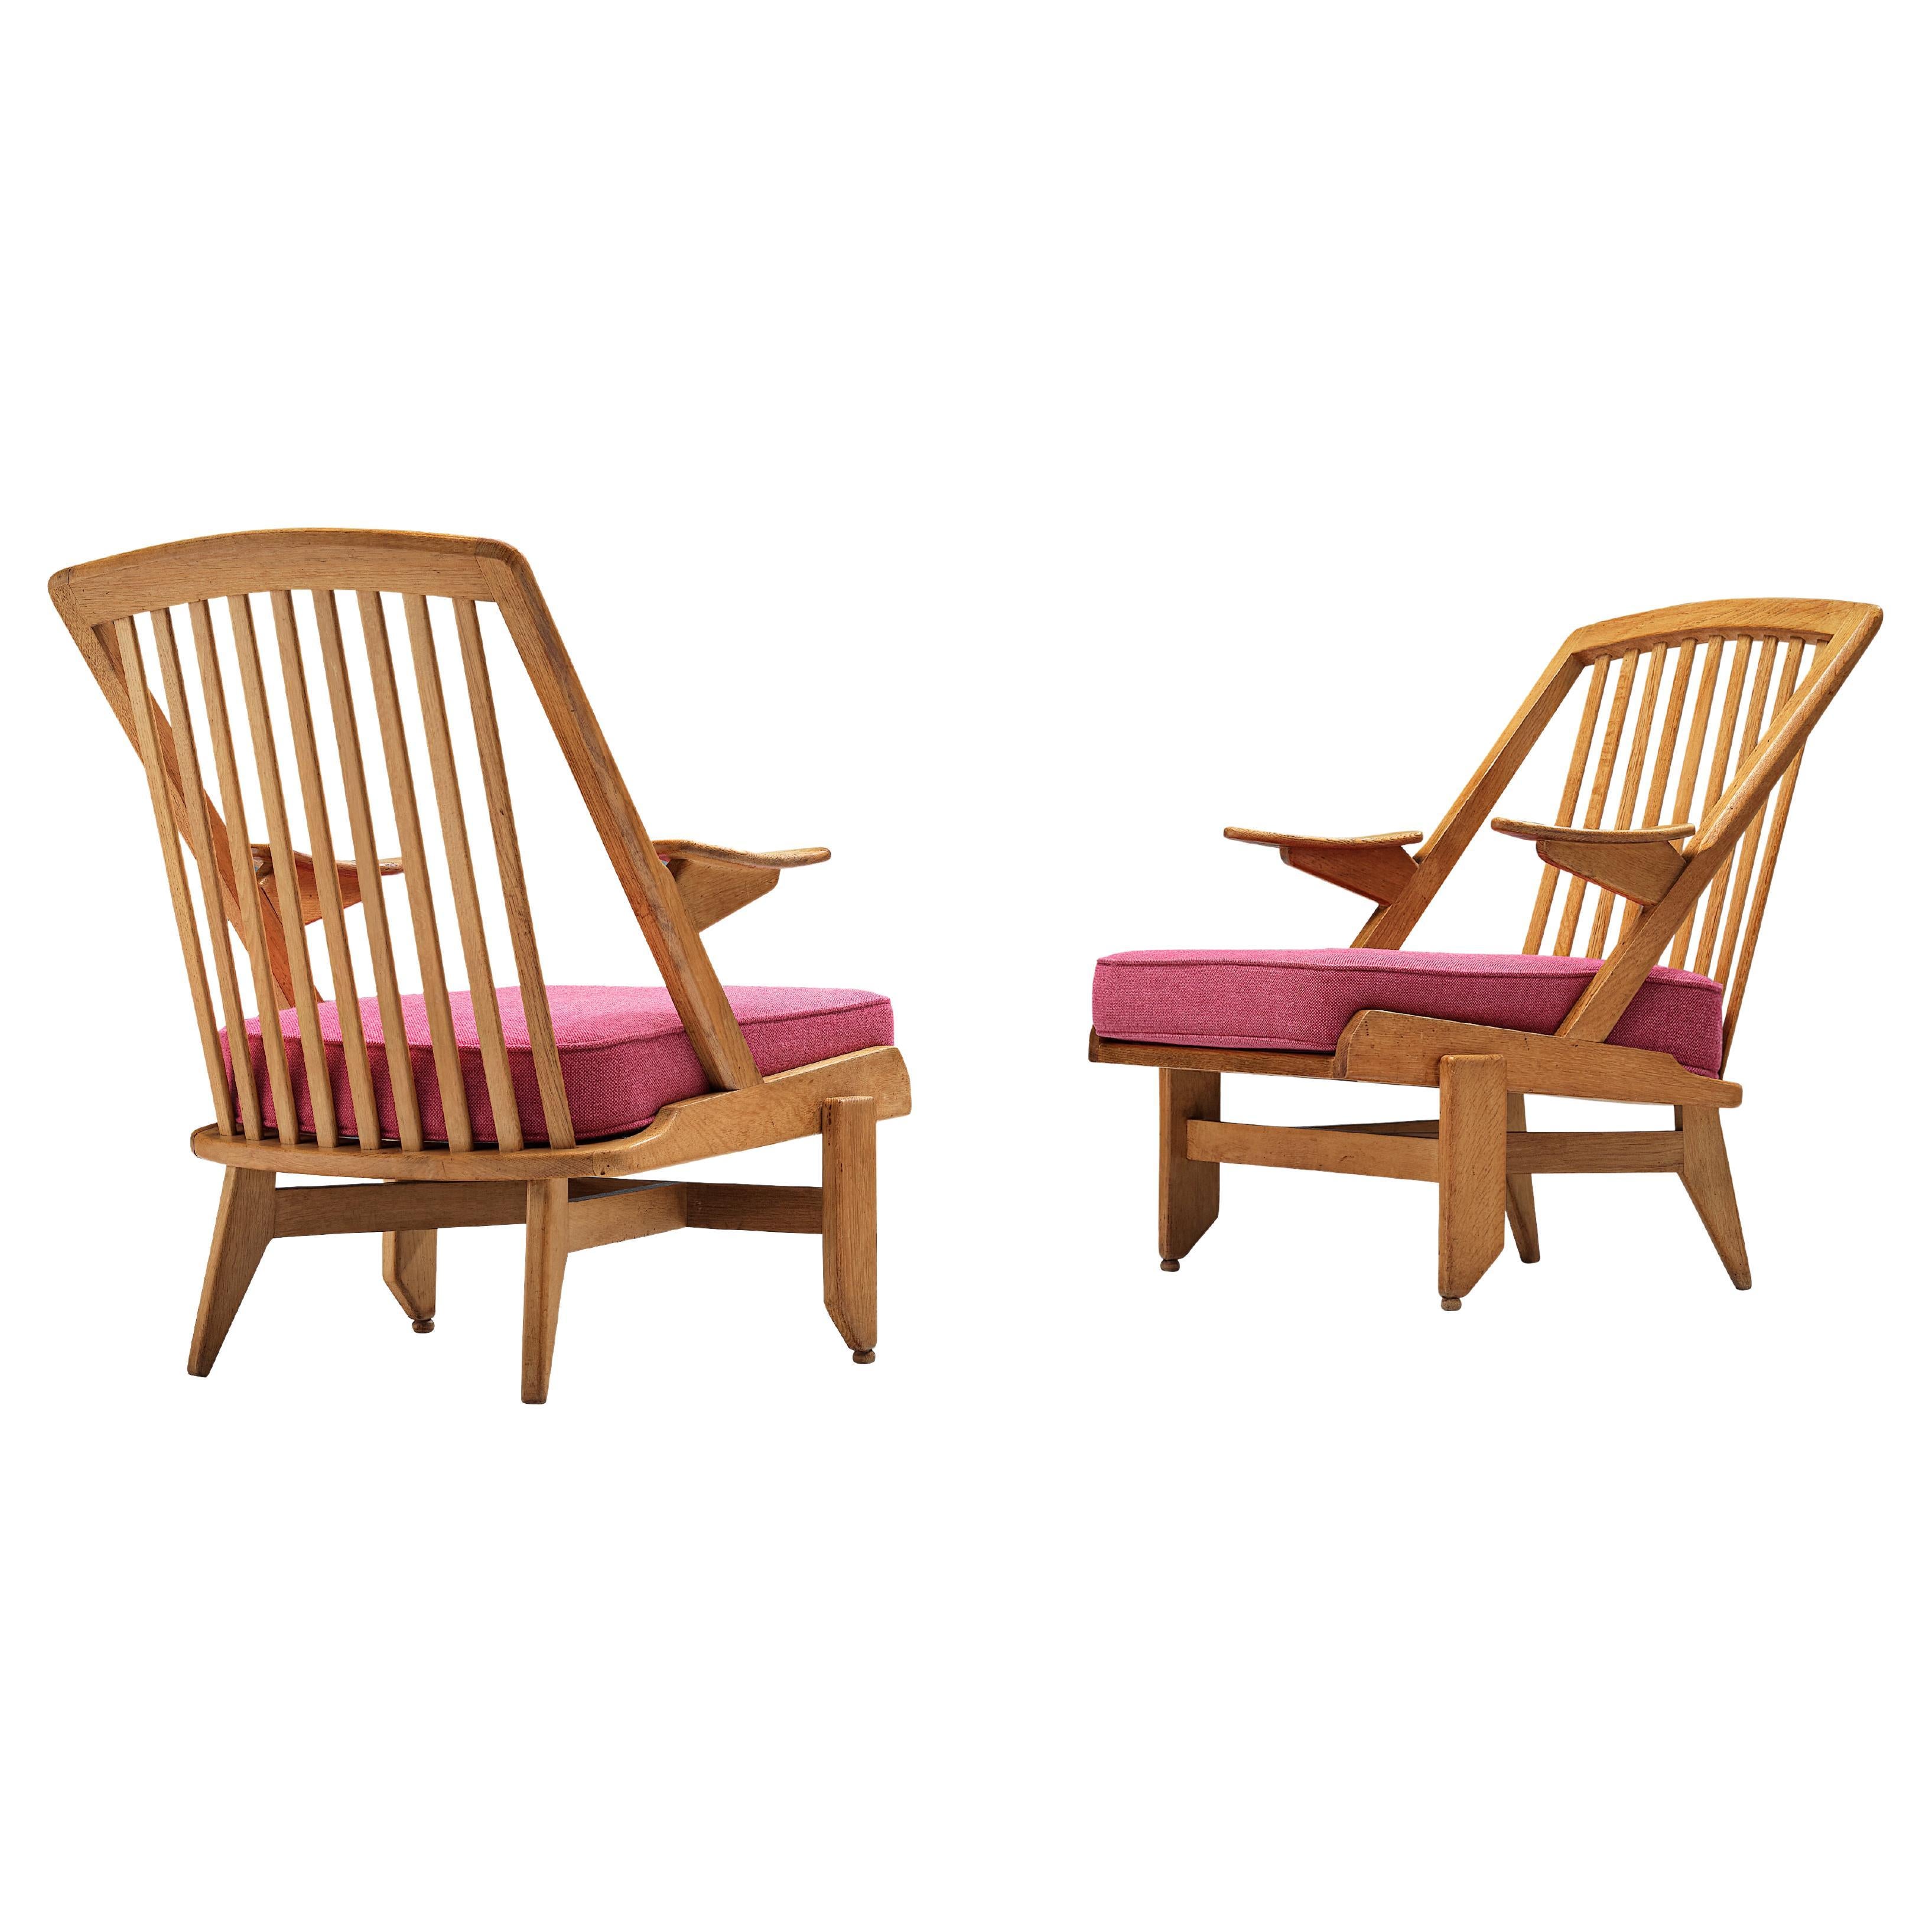 Guillerme & Chambron Pair of Lounge Chairs in Pink Upholstery